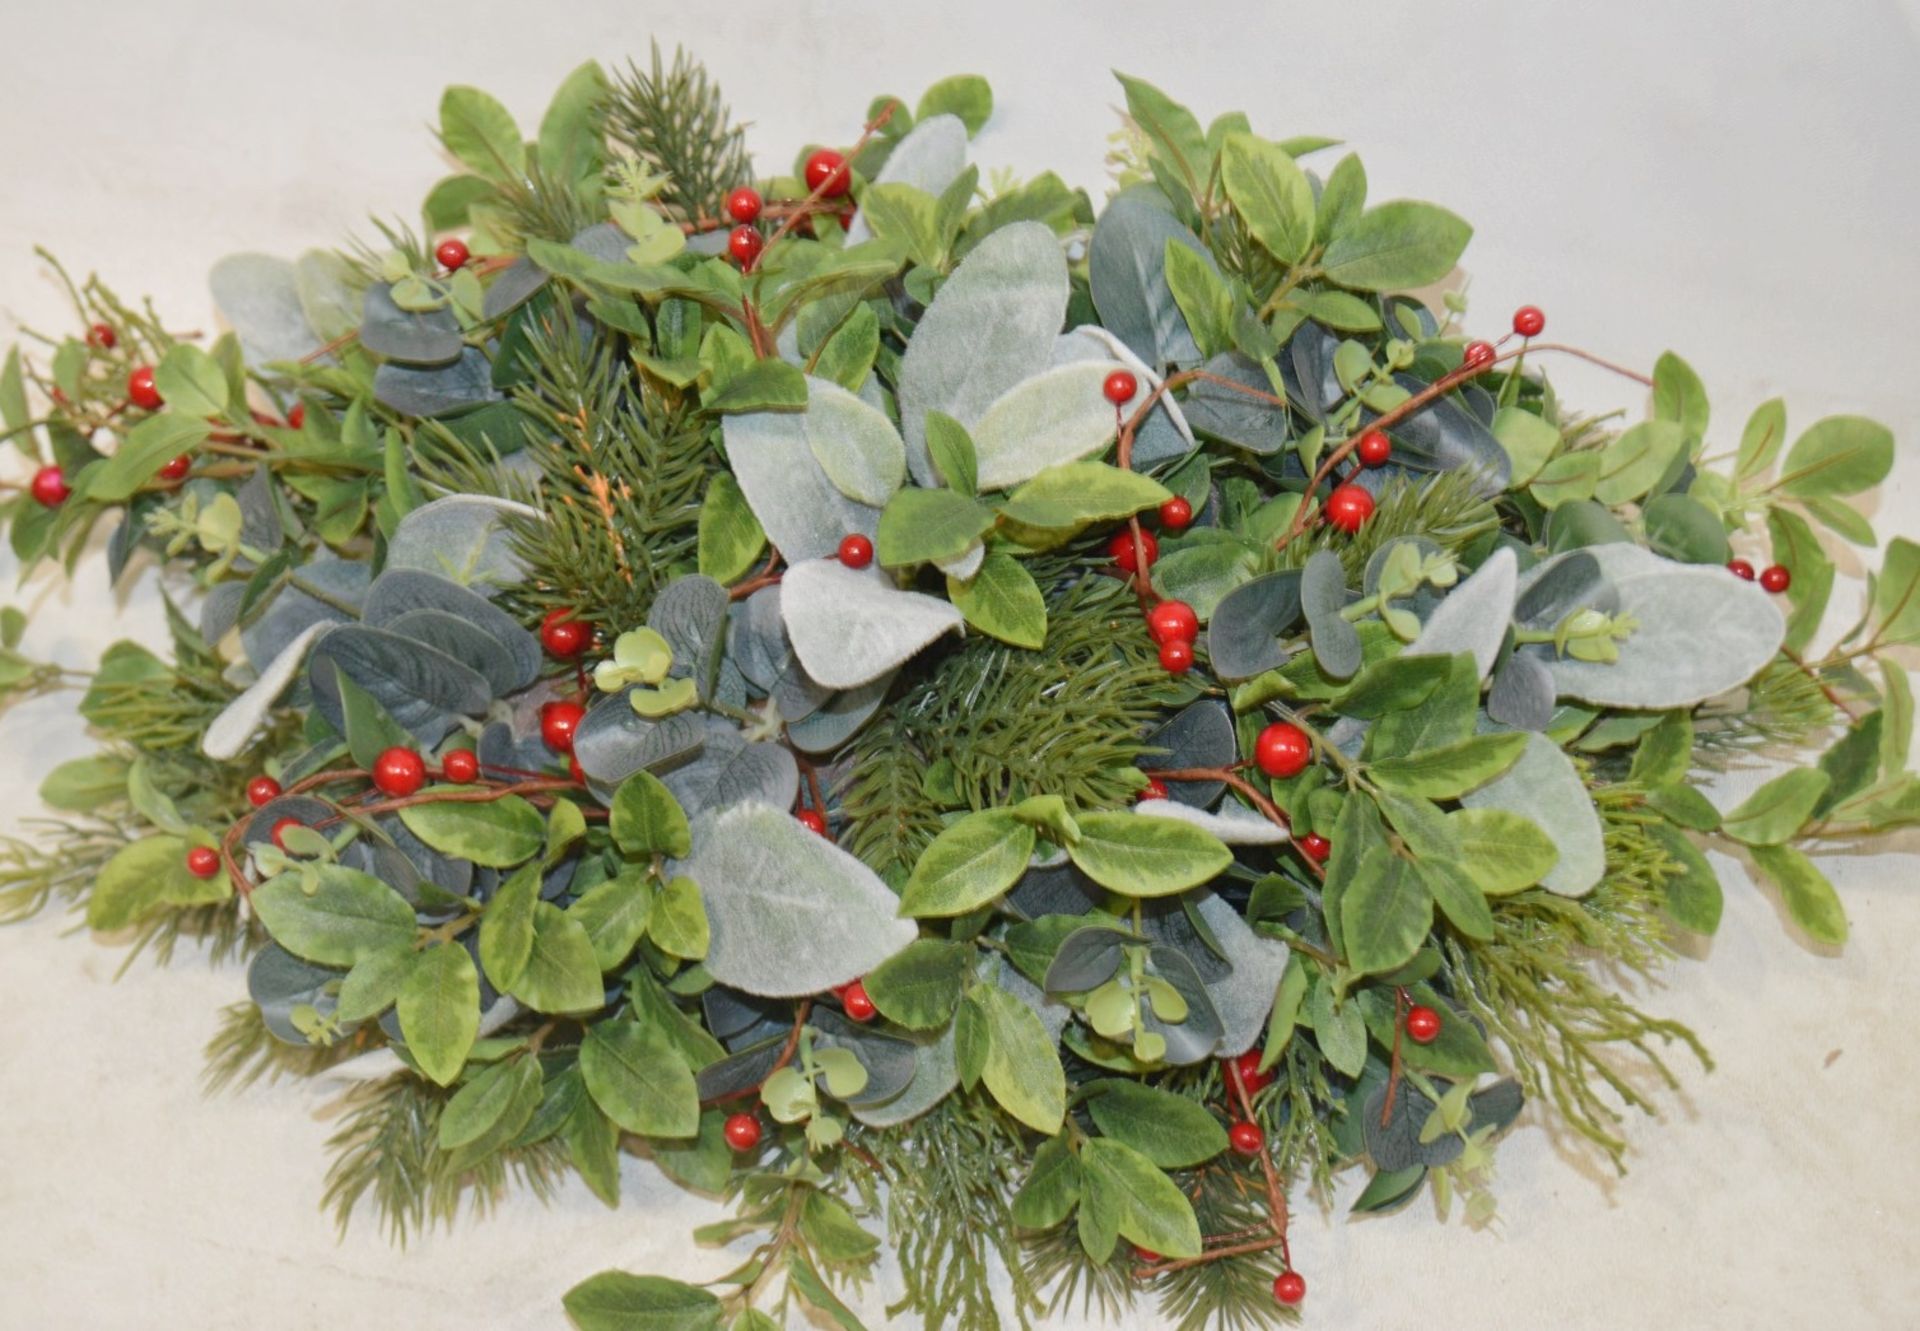 4 x Commercial Decorative Christmas Wreaths - Variety As Shown - Dimensions: 50 x 30cm - Ex- - Image 4 of 4